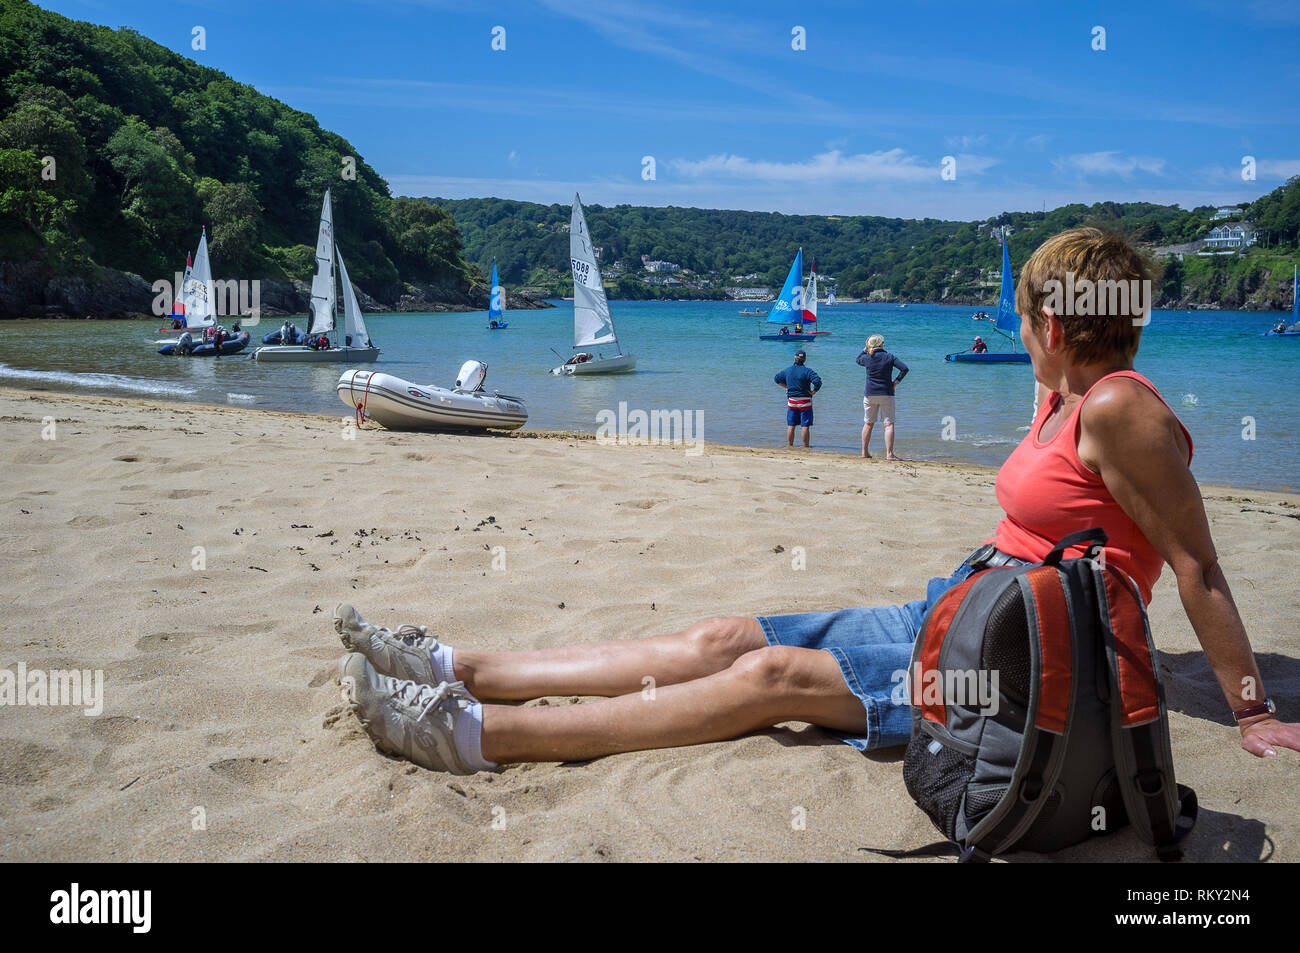 A woman watching sailing activities in the Salcombe Estuary off Mill Bay, a sheltered, sandy beach popular with tourists and locals alike. Devon, UK Stock Photo